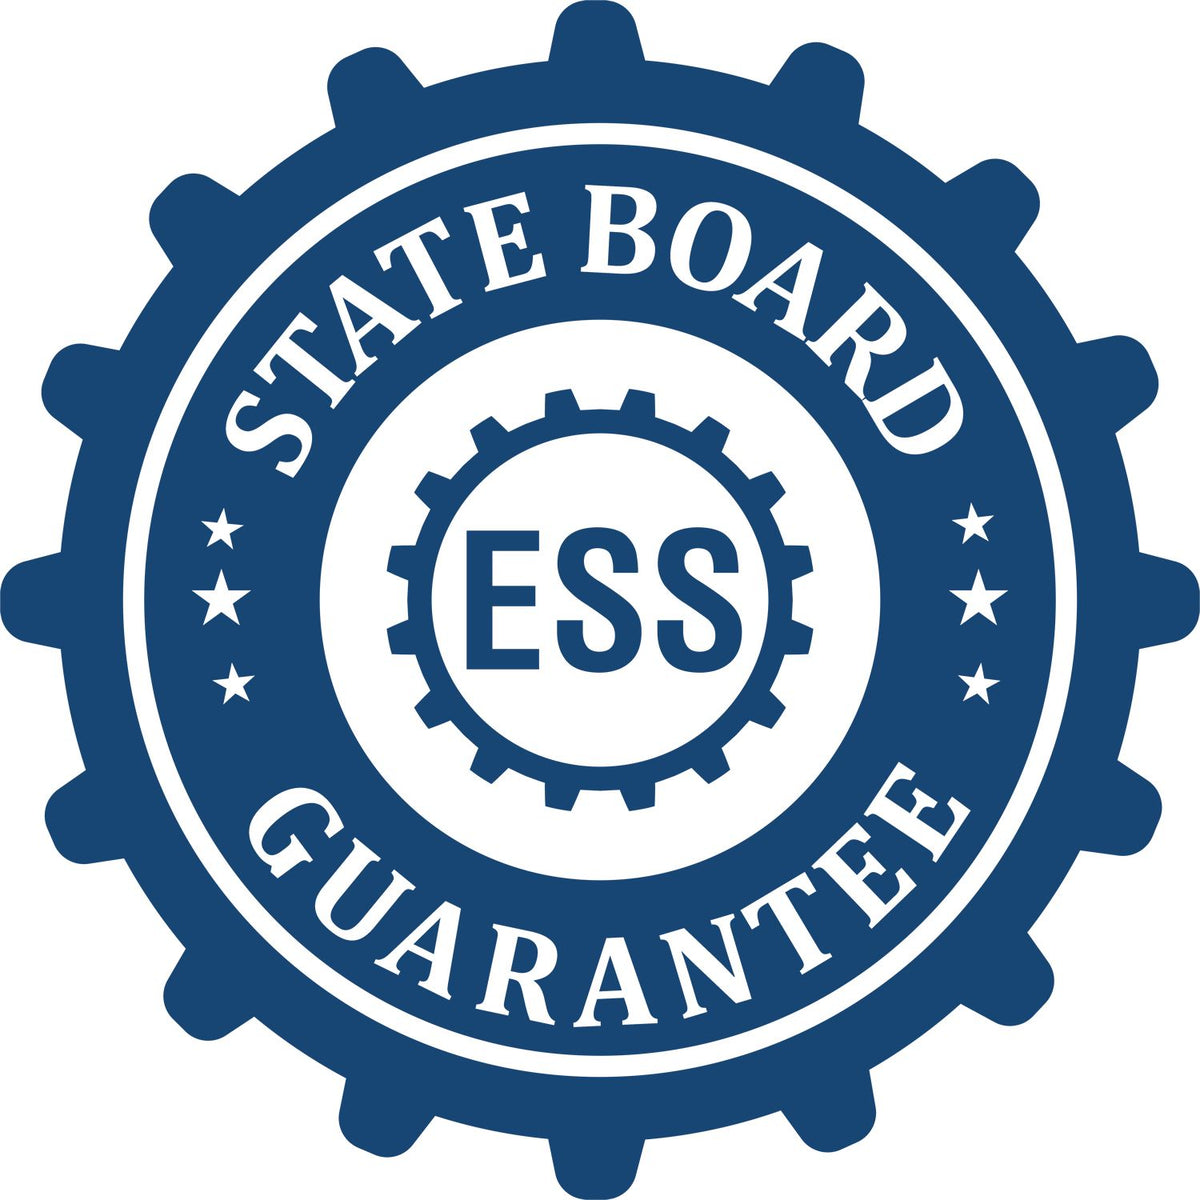 An emblem in a gear shape illustrating a state board guarantee for the Massachusetts Landscape Architectural Seal Stamp product.